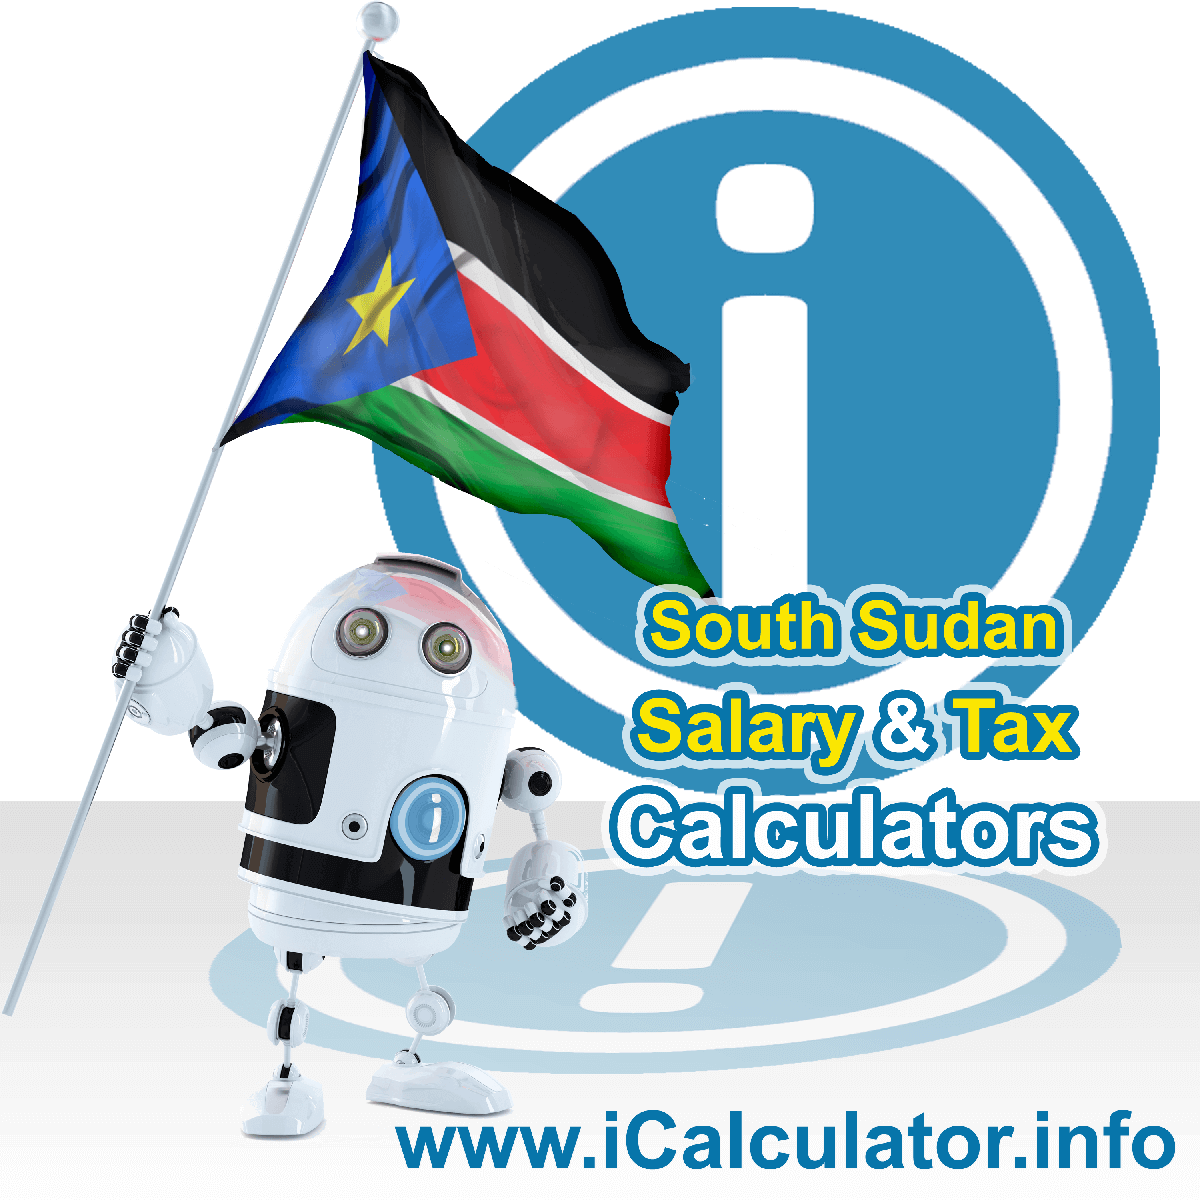 South Sudan Salary Calculator. This image shows the South Sudanese flag and information relating to the tax formula for the South Sudan Tax Calculator